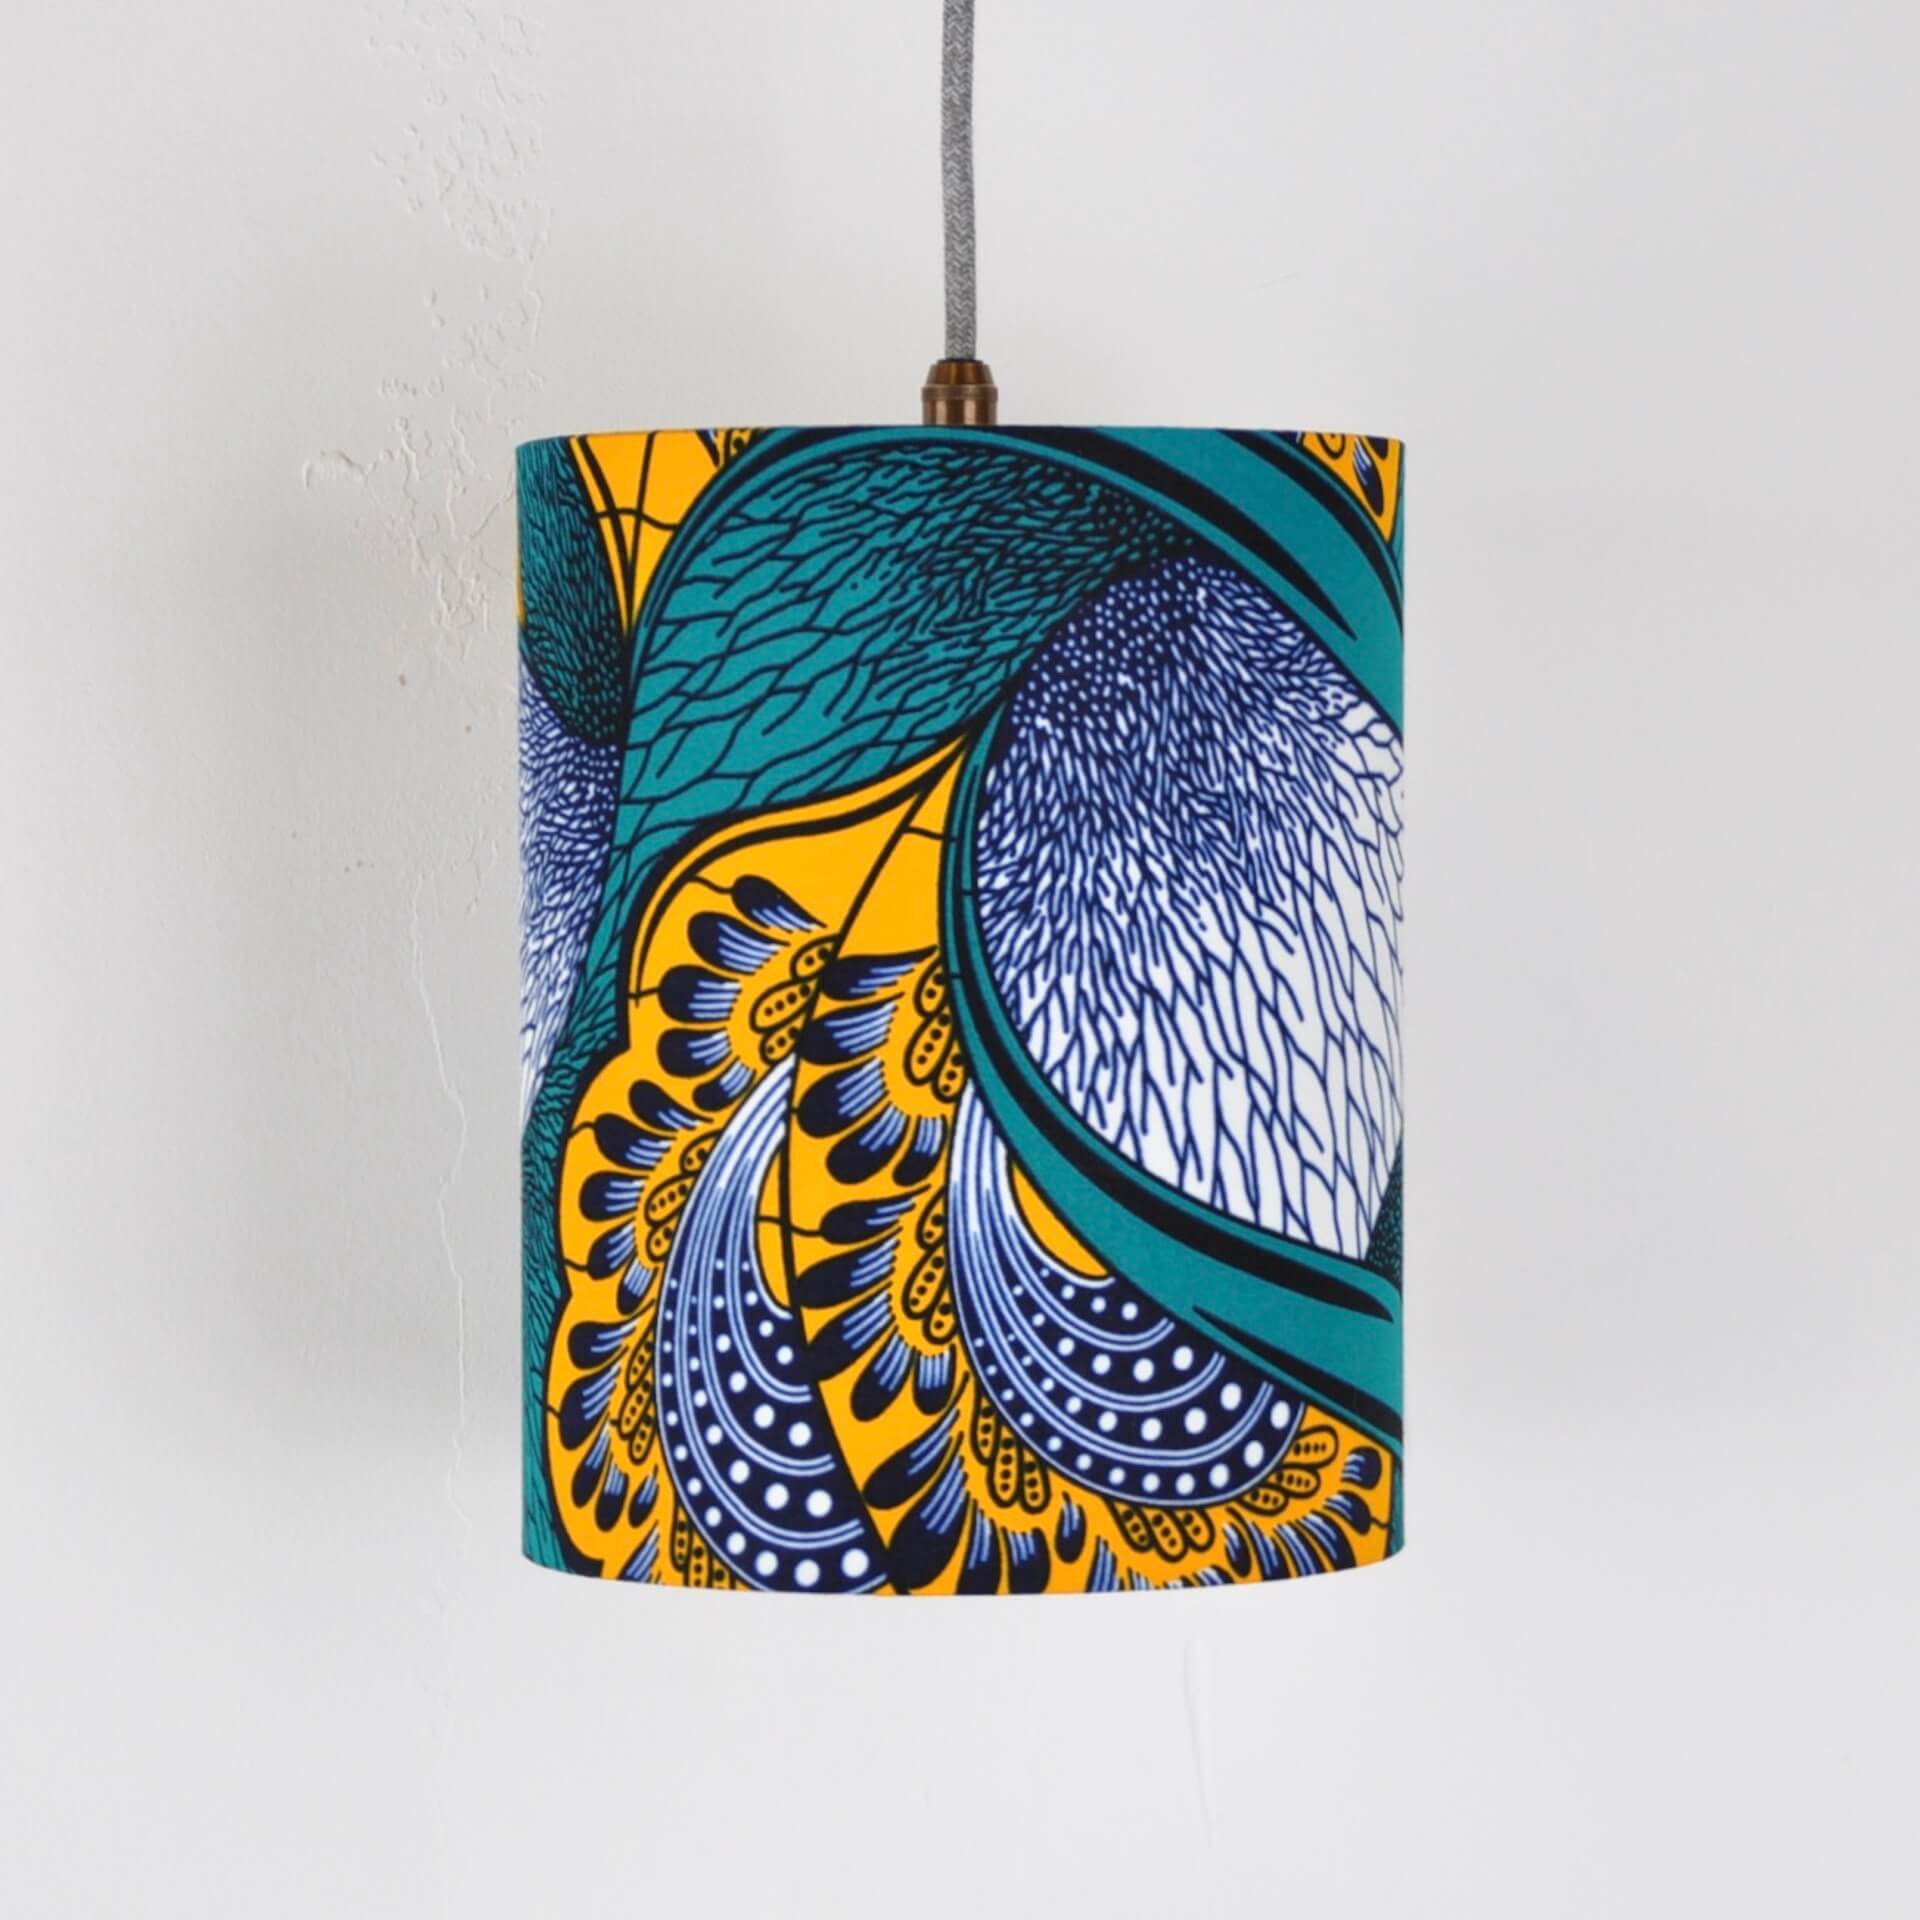 Colourful Shadez Bristol ⌀ 20 cm x H 25cm African Print Lampshade - Teal & Yellow Peacock Feather (various sizes)